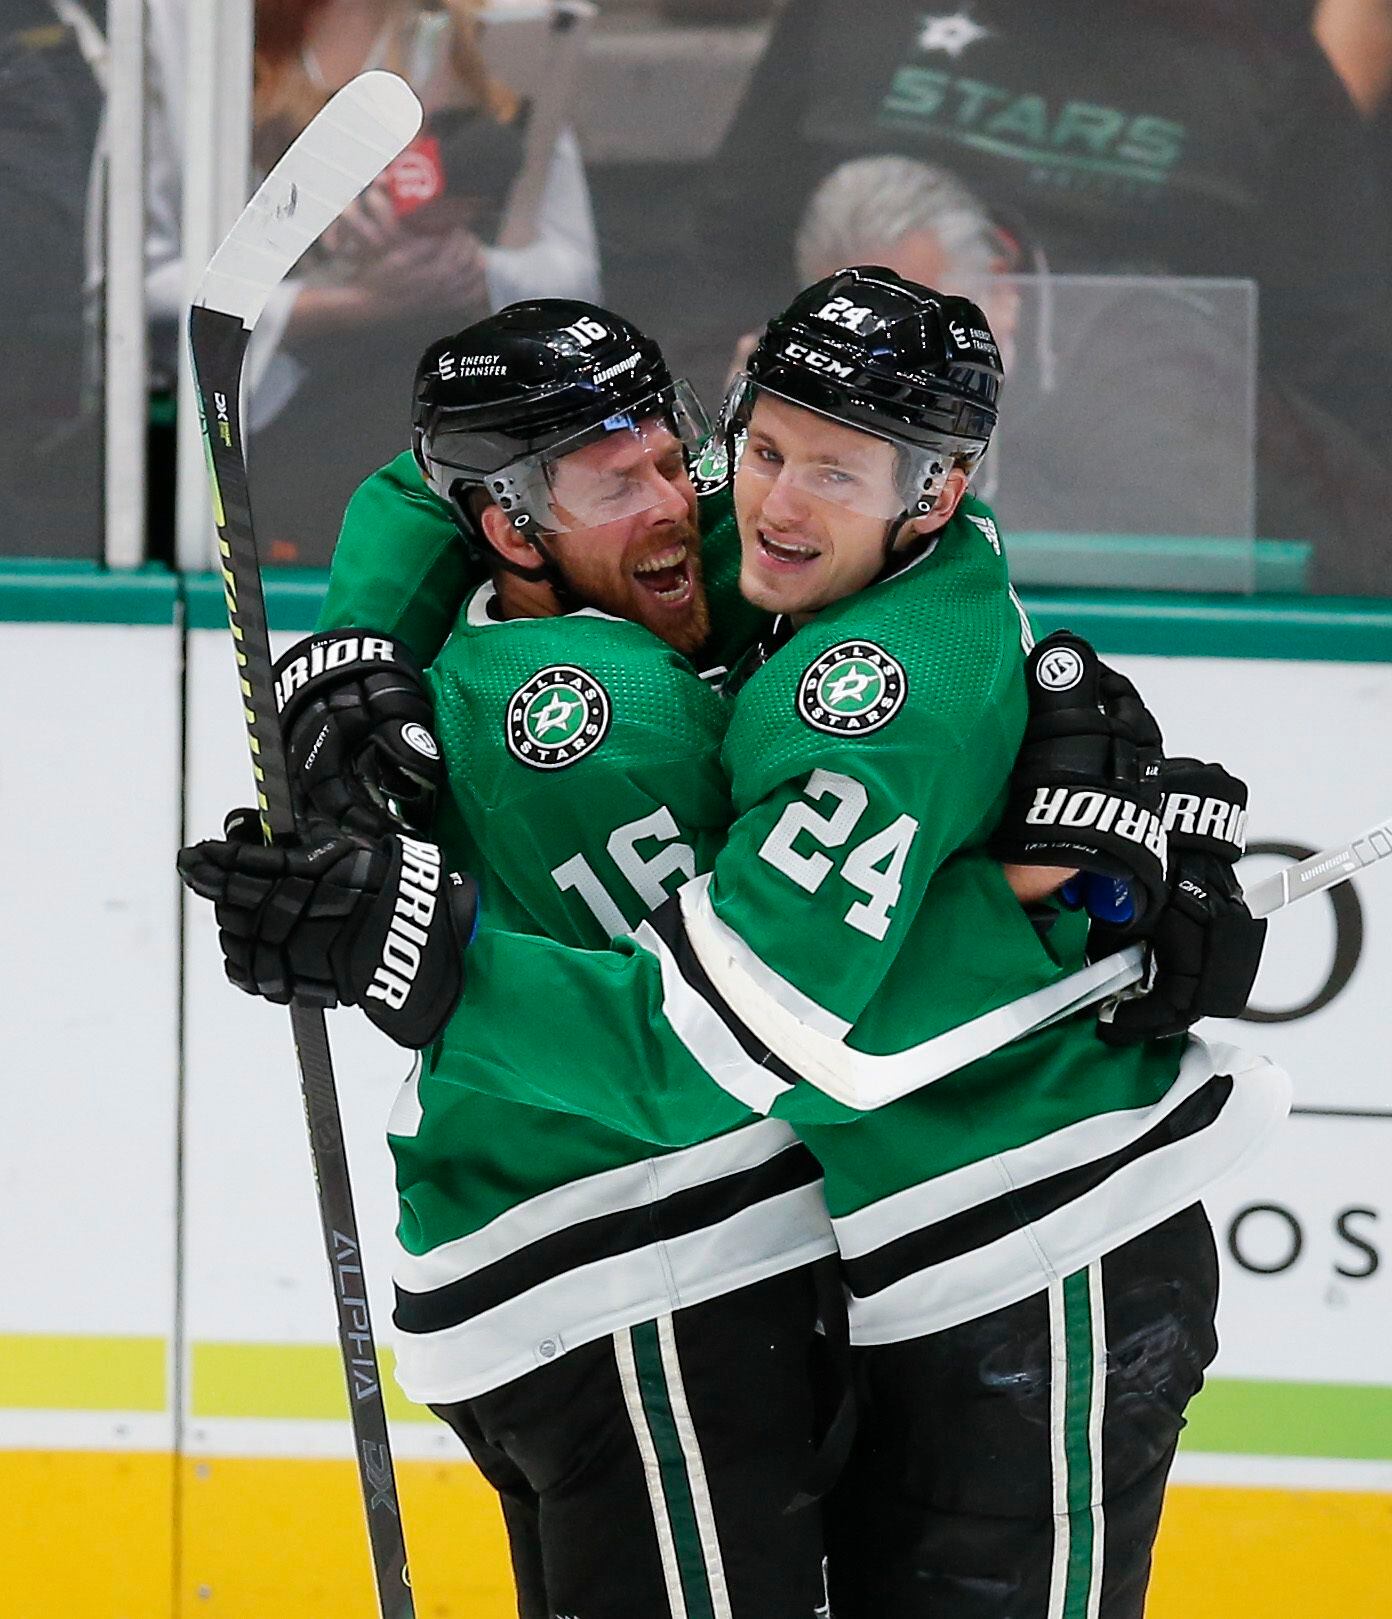 Dallas Stars forward Joe Pavelski (16) is congratulated by forward Roope Hintz (24) after scoring a goal during the third period of an NHL hockey game against the Carolina Hurricanes in Dallas, Tuesday, November 30, 2021. Dallas won 4-1. (Brandon Wade/Special Contributor)